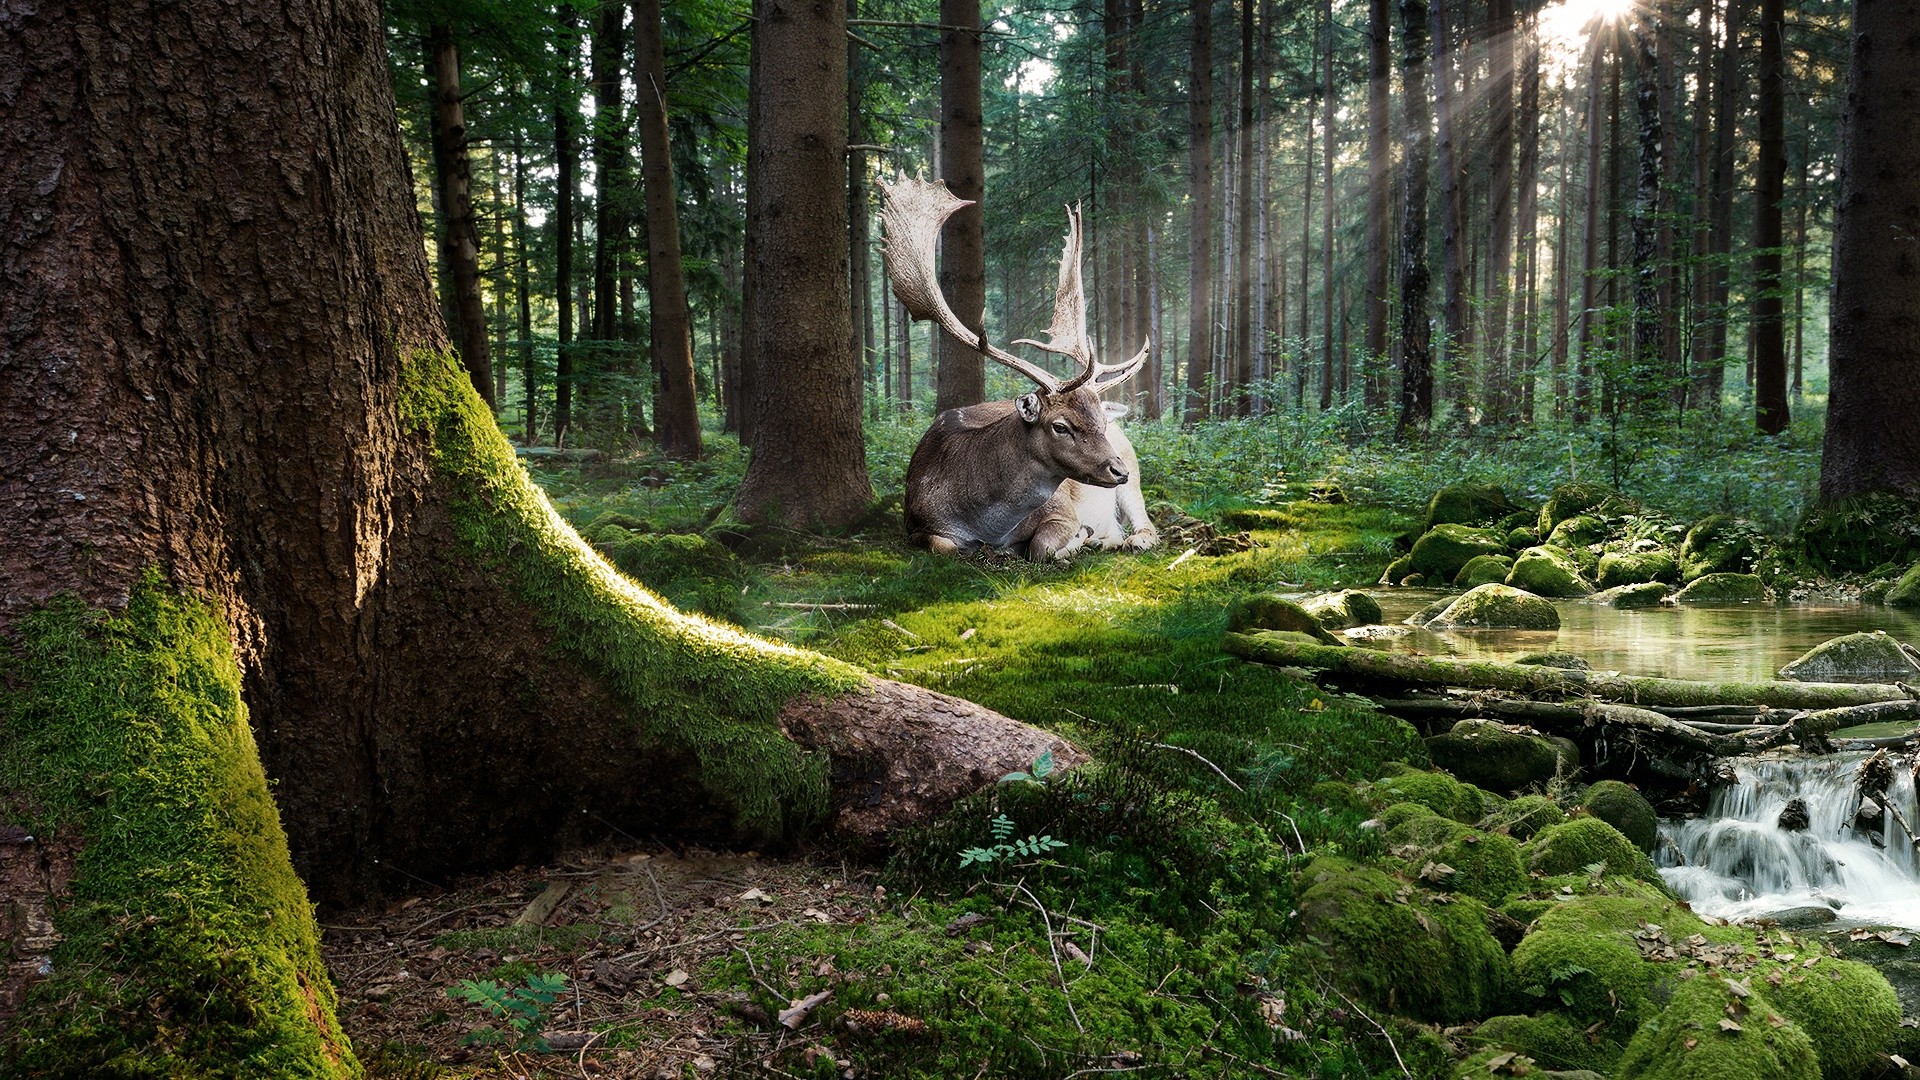 General 1920x1080 nature trees forest moss animals deer sun rays stones water photoshopped mammals creeks